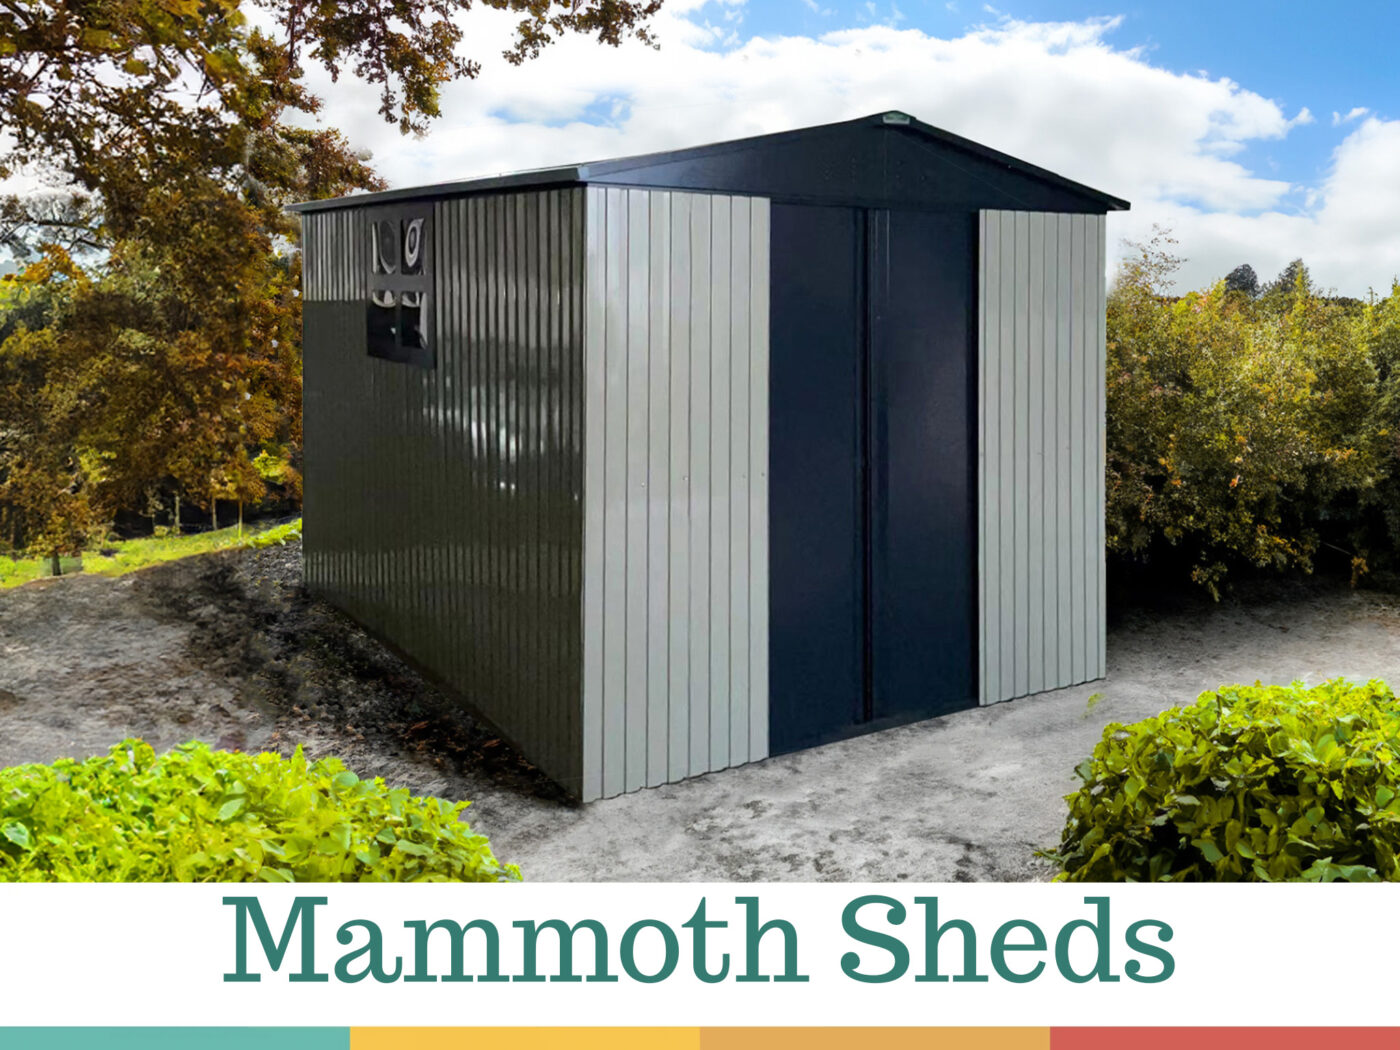 The Mammoth Shed Range